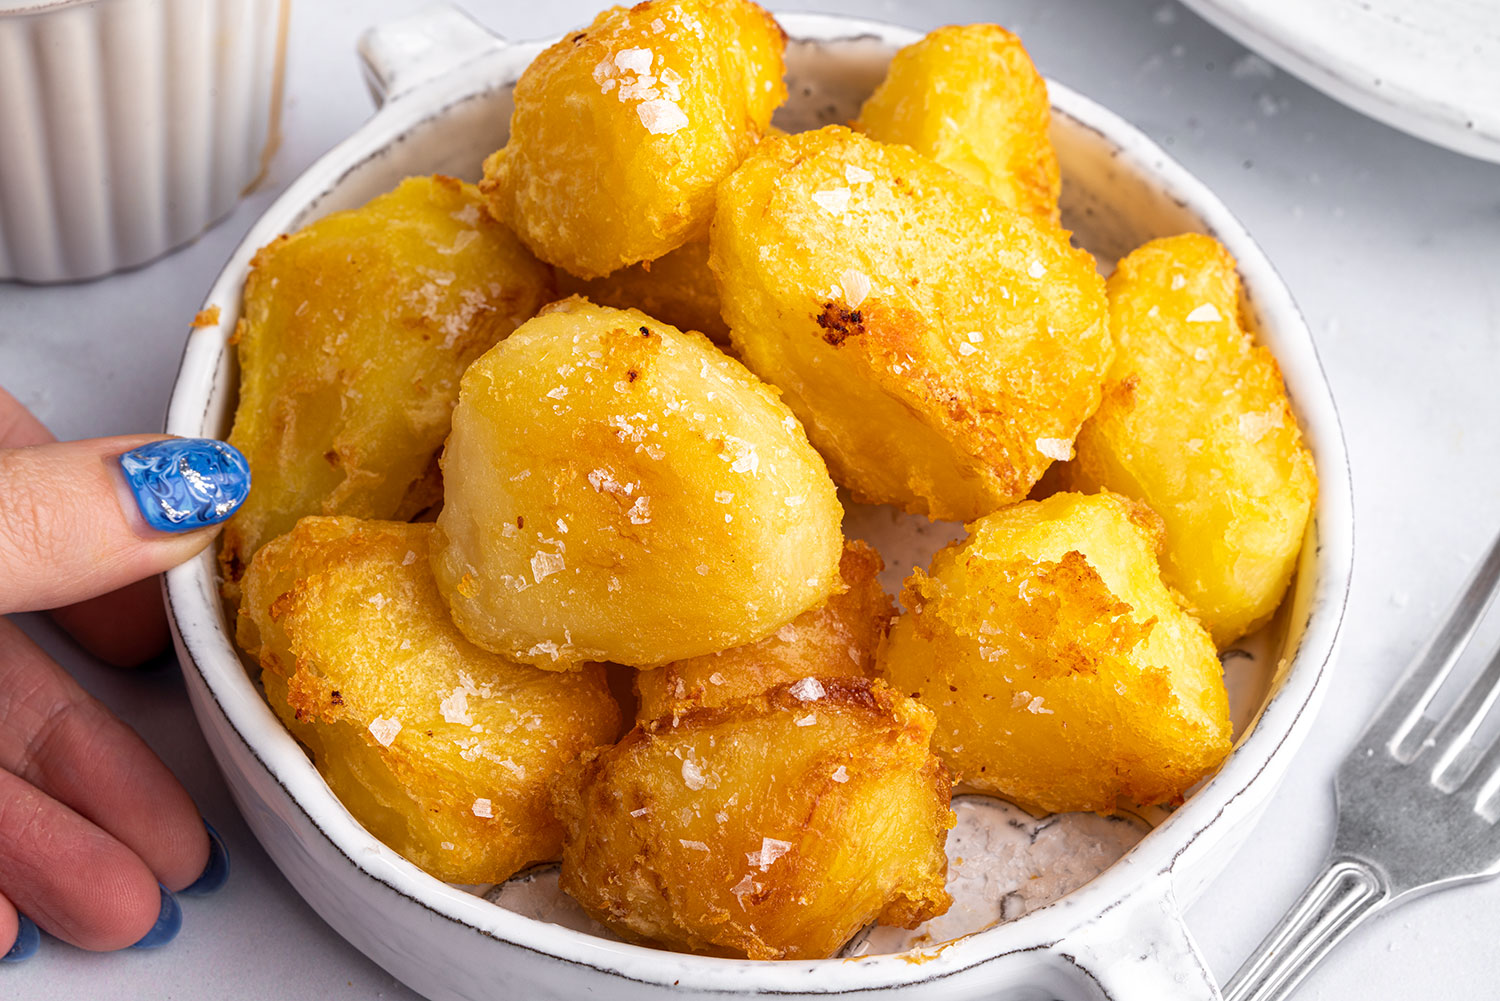 Potatoe/Potato: Here's A Look at Our Potato Cooking Solutions